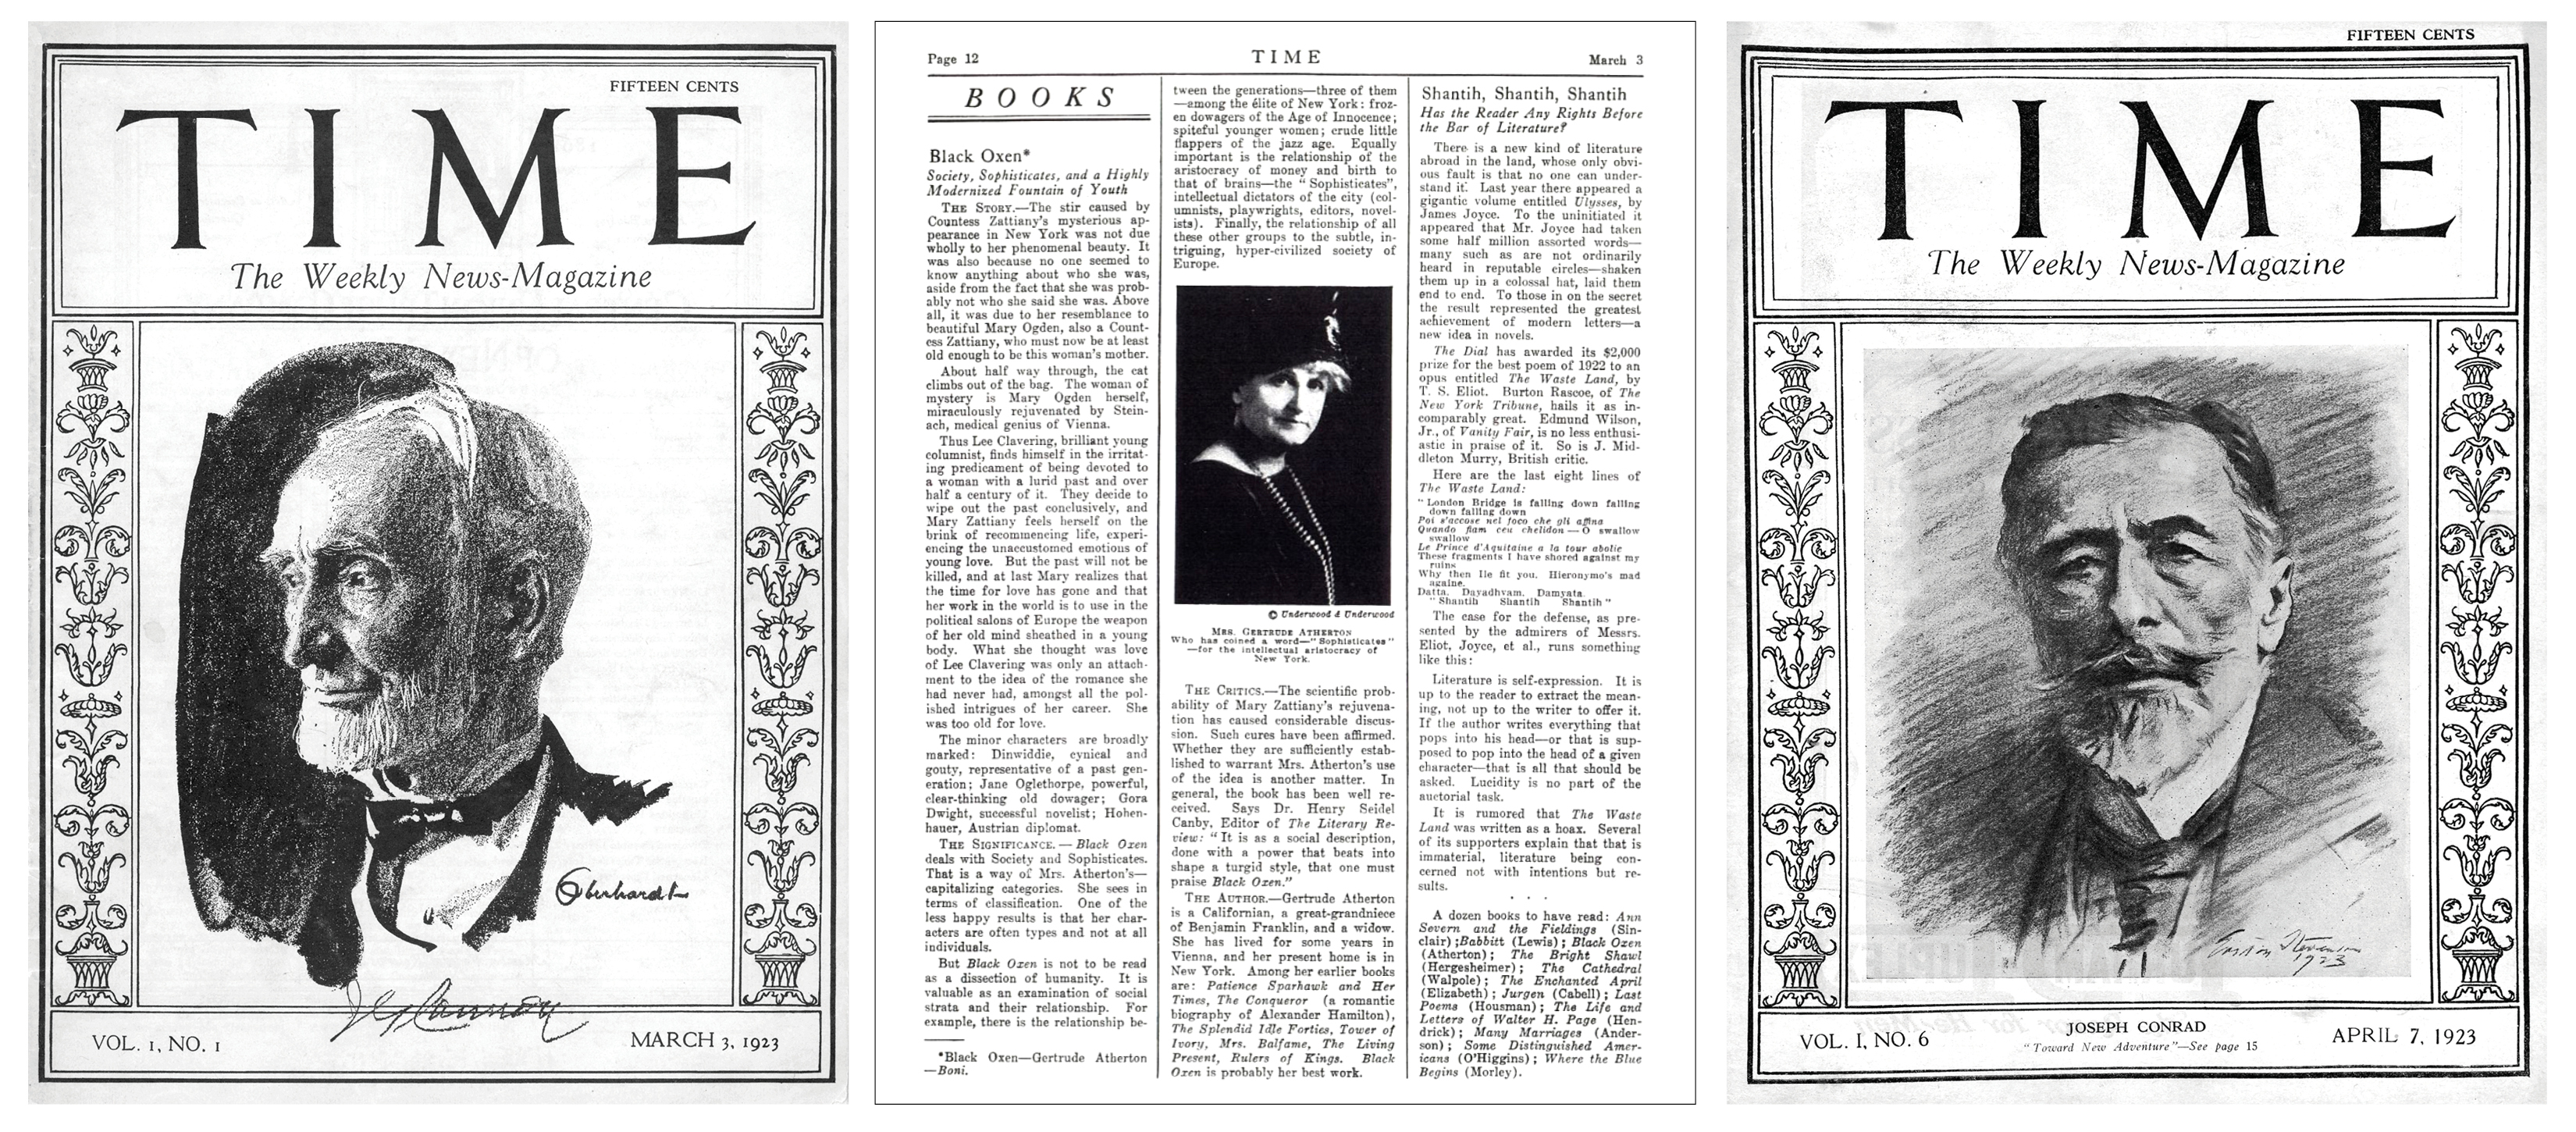 The first cover of TIME and the <em>Books</em> section from March 3, 1923. The first writer to appear on the cover was Jospeh Conrad on April 7, 1923.